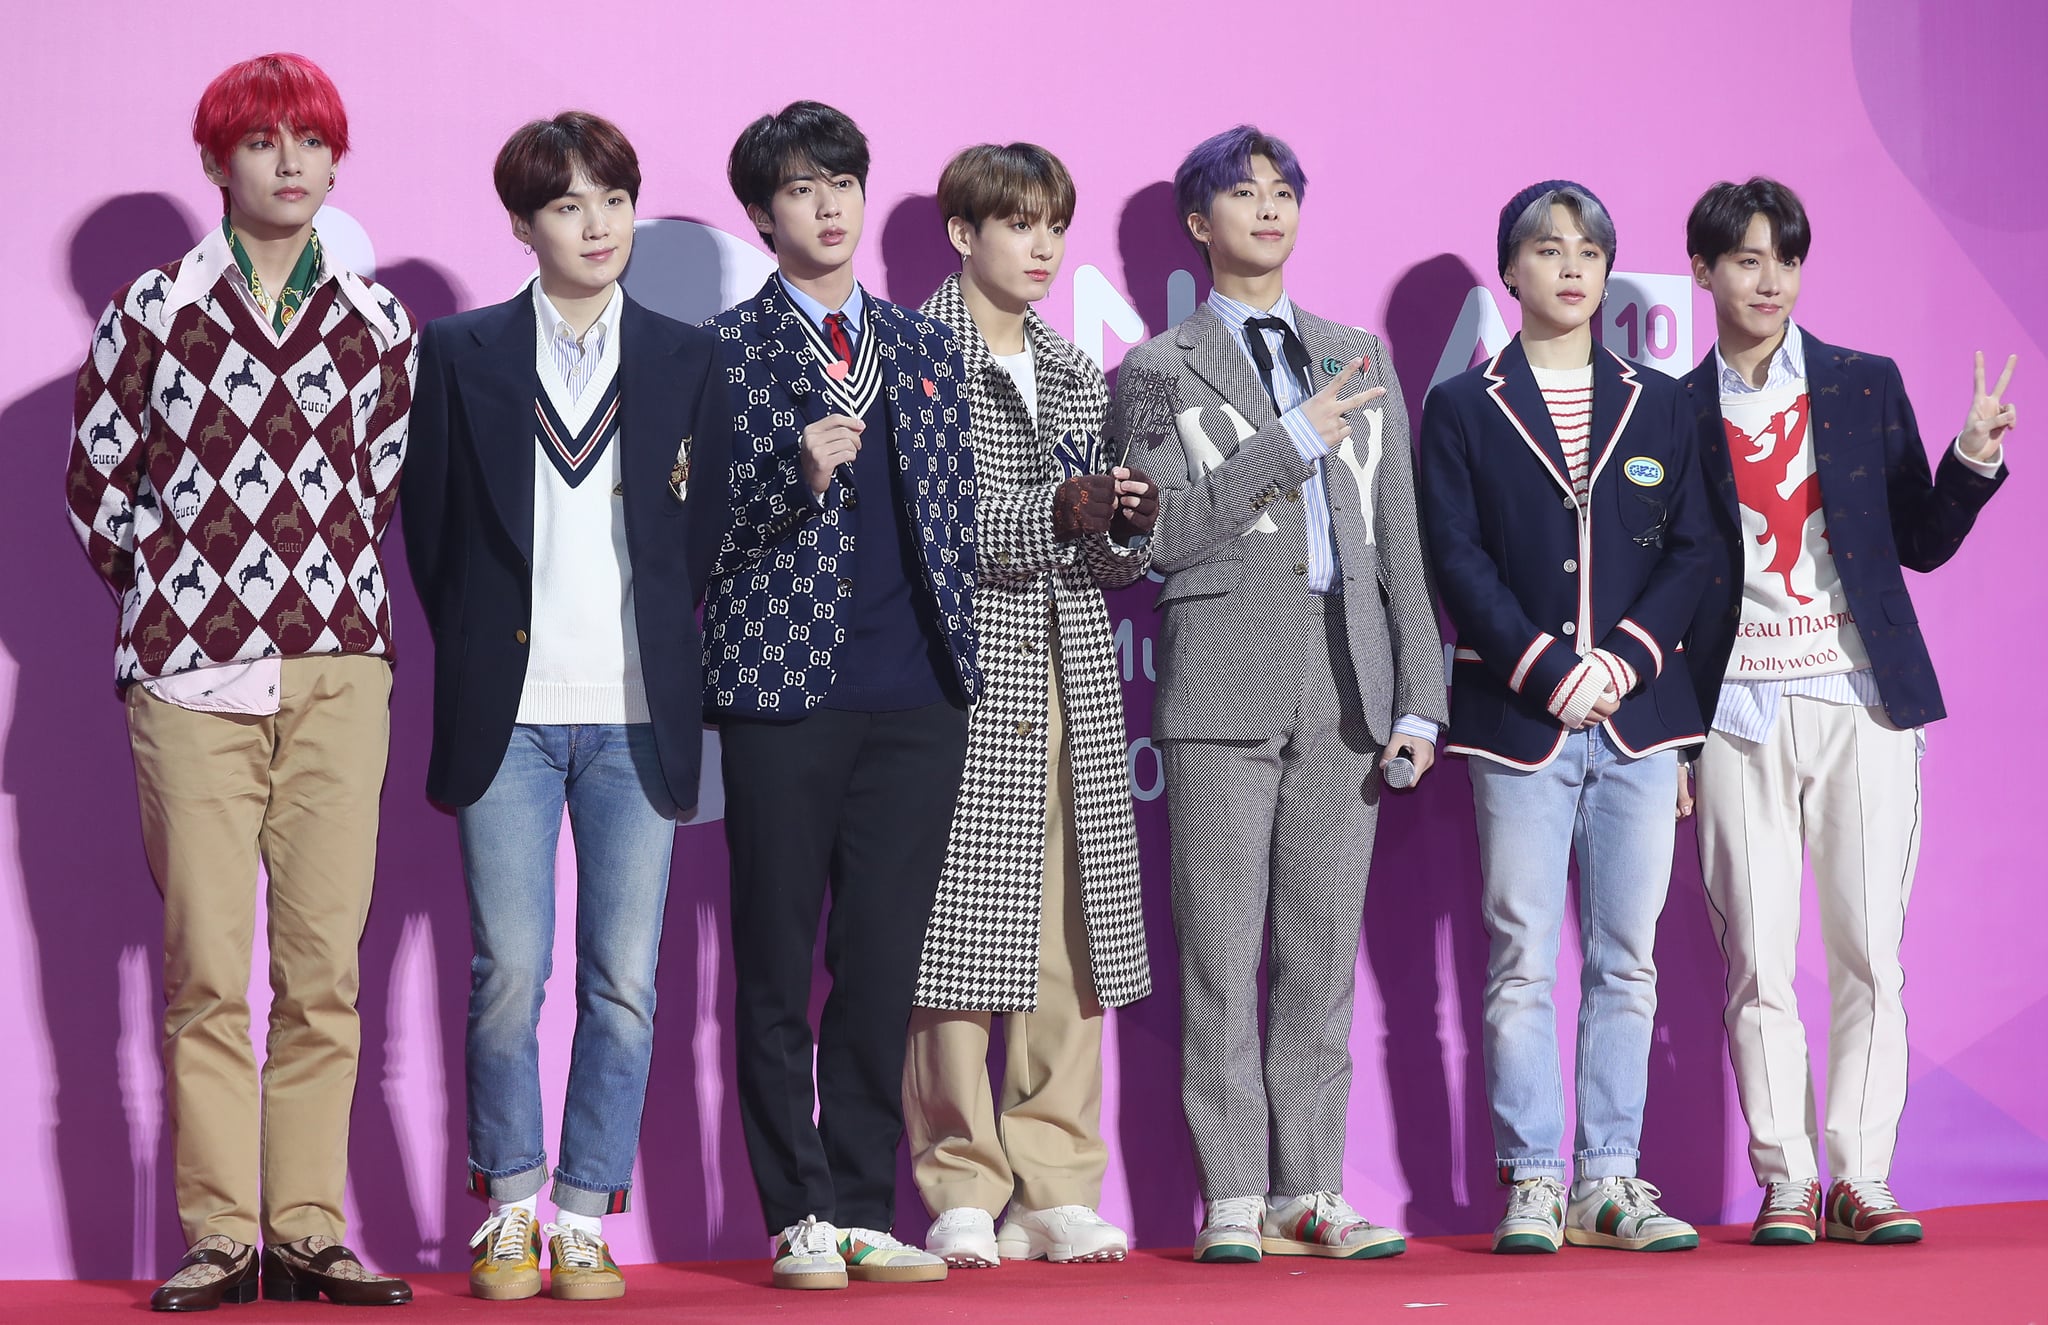 SEOUL, SOUTH KOREA - DECEMBER 01: BTS attends the 2018 Melon Music Awards at Gocheok Sky Dome on December 01, 2018 in Seoul, South Korea. (Photo by JTBC PLUS/Imazins via Getty Images)